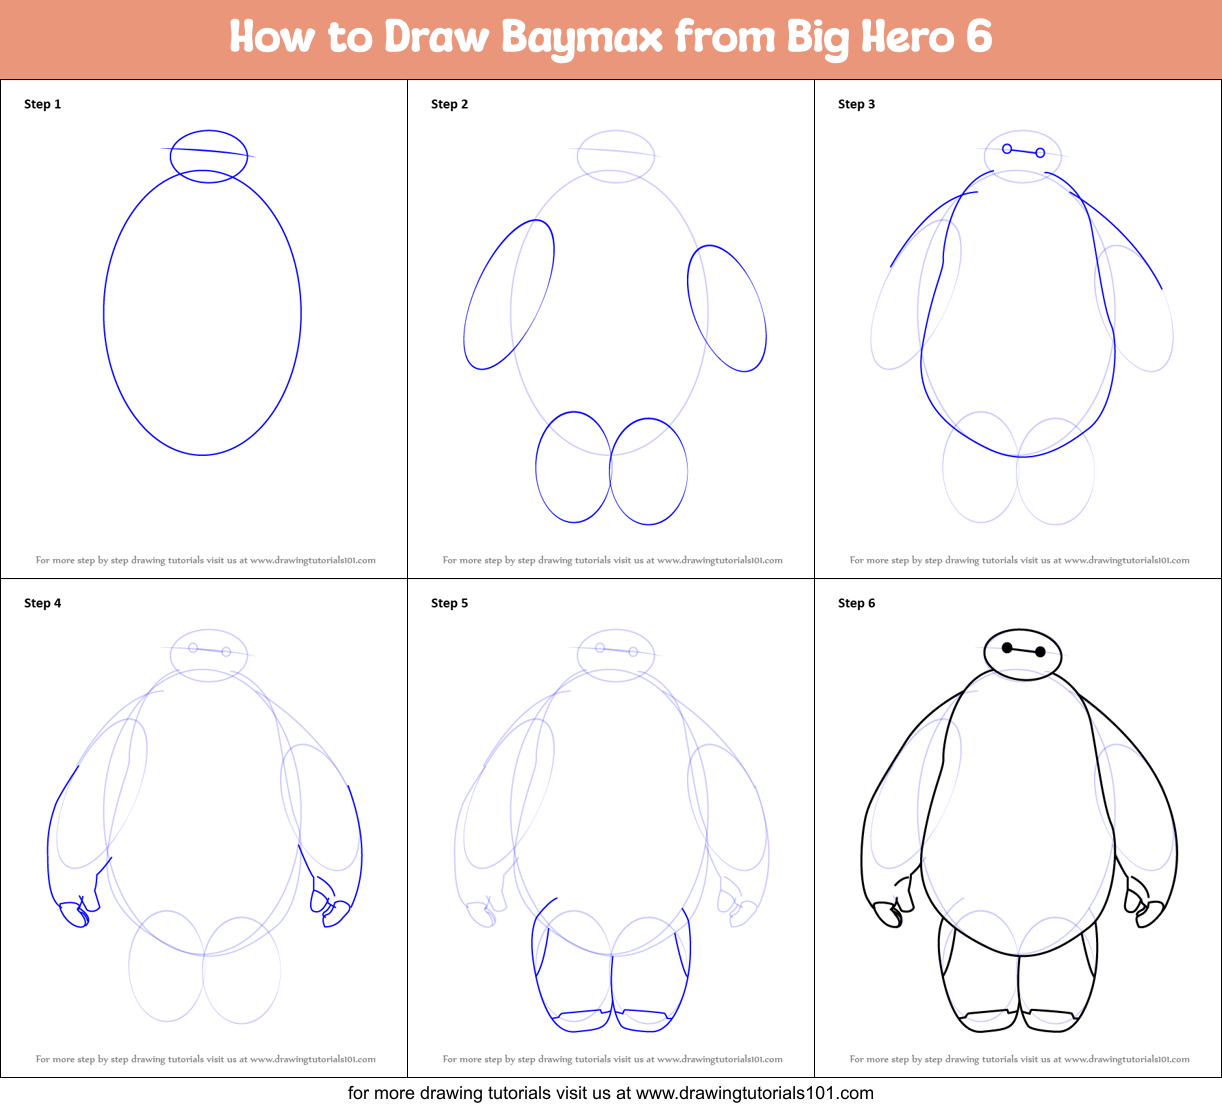 How to Draw Baymax from Big Hero 6 (Big Hero 6) Step by Step